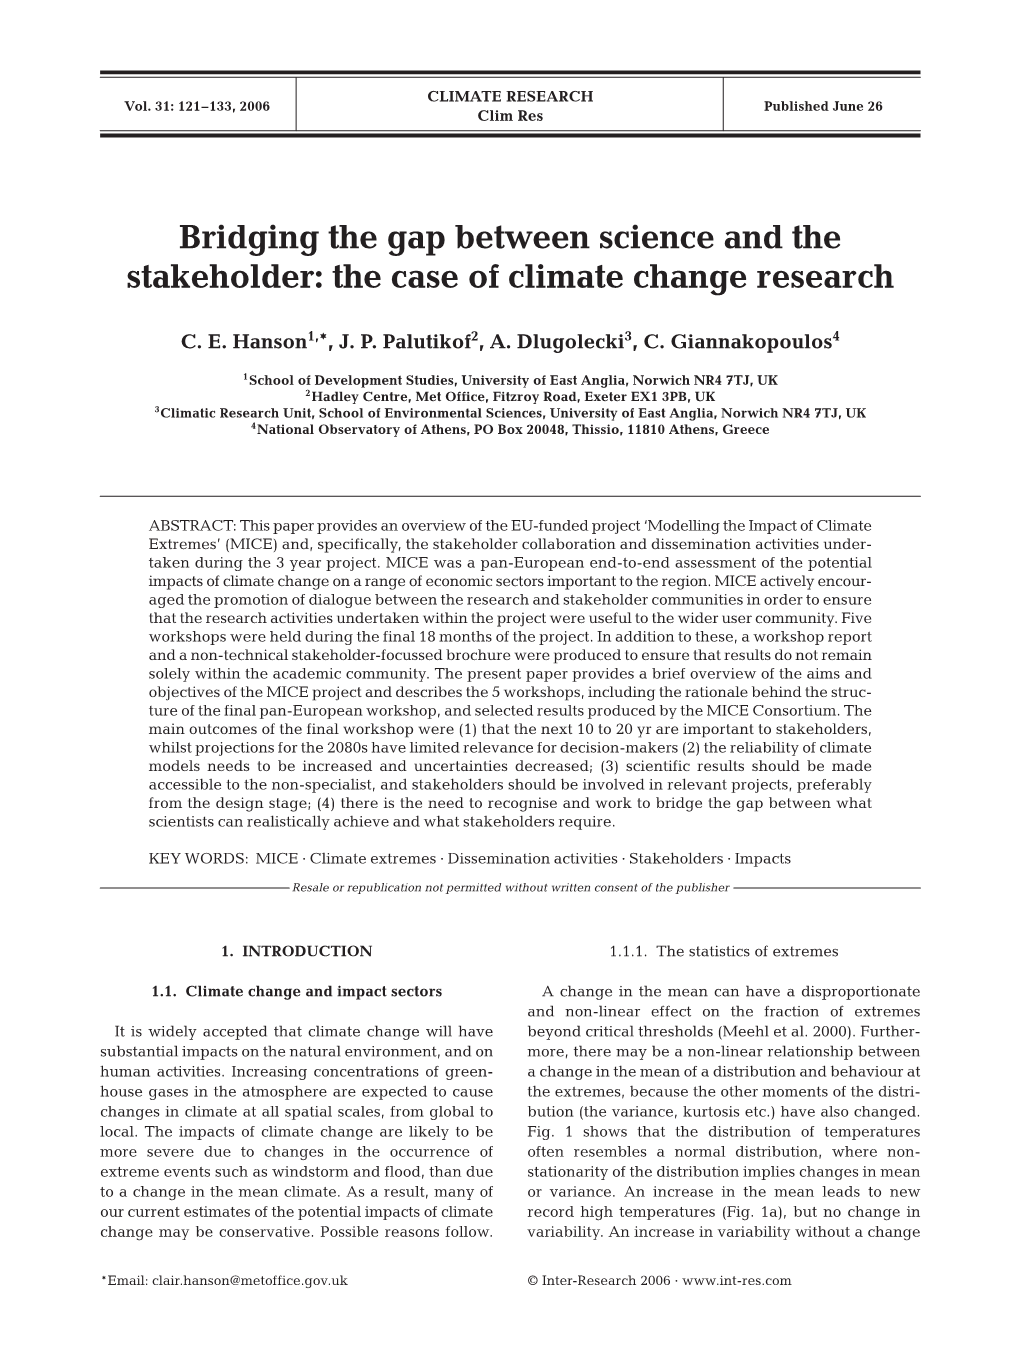 Bridging the Gap Between Science and the Stakeholder: the Case of Climate Change Research